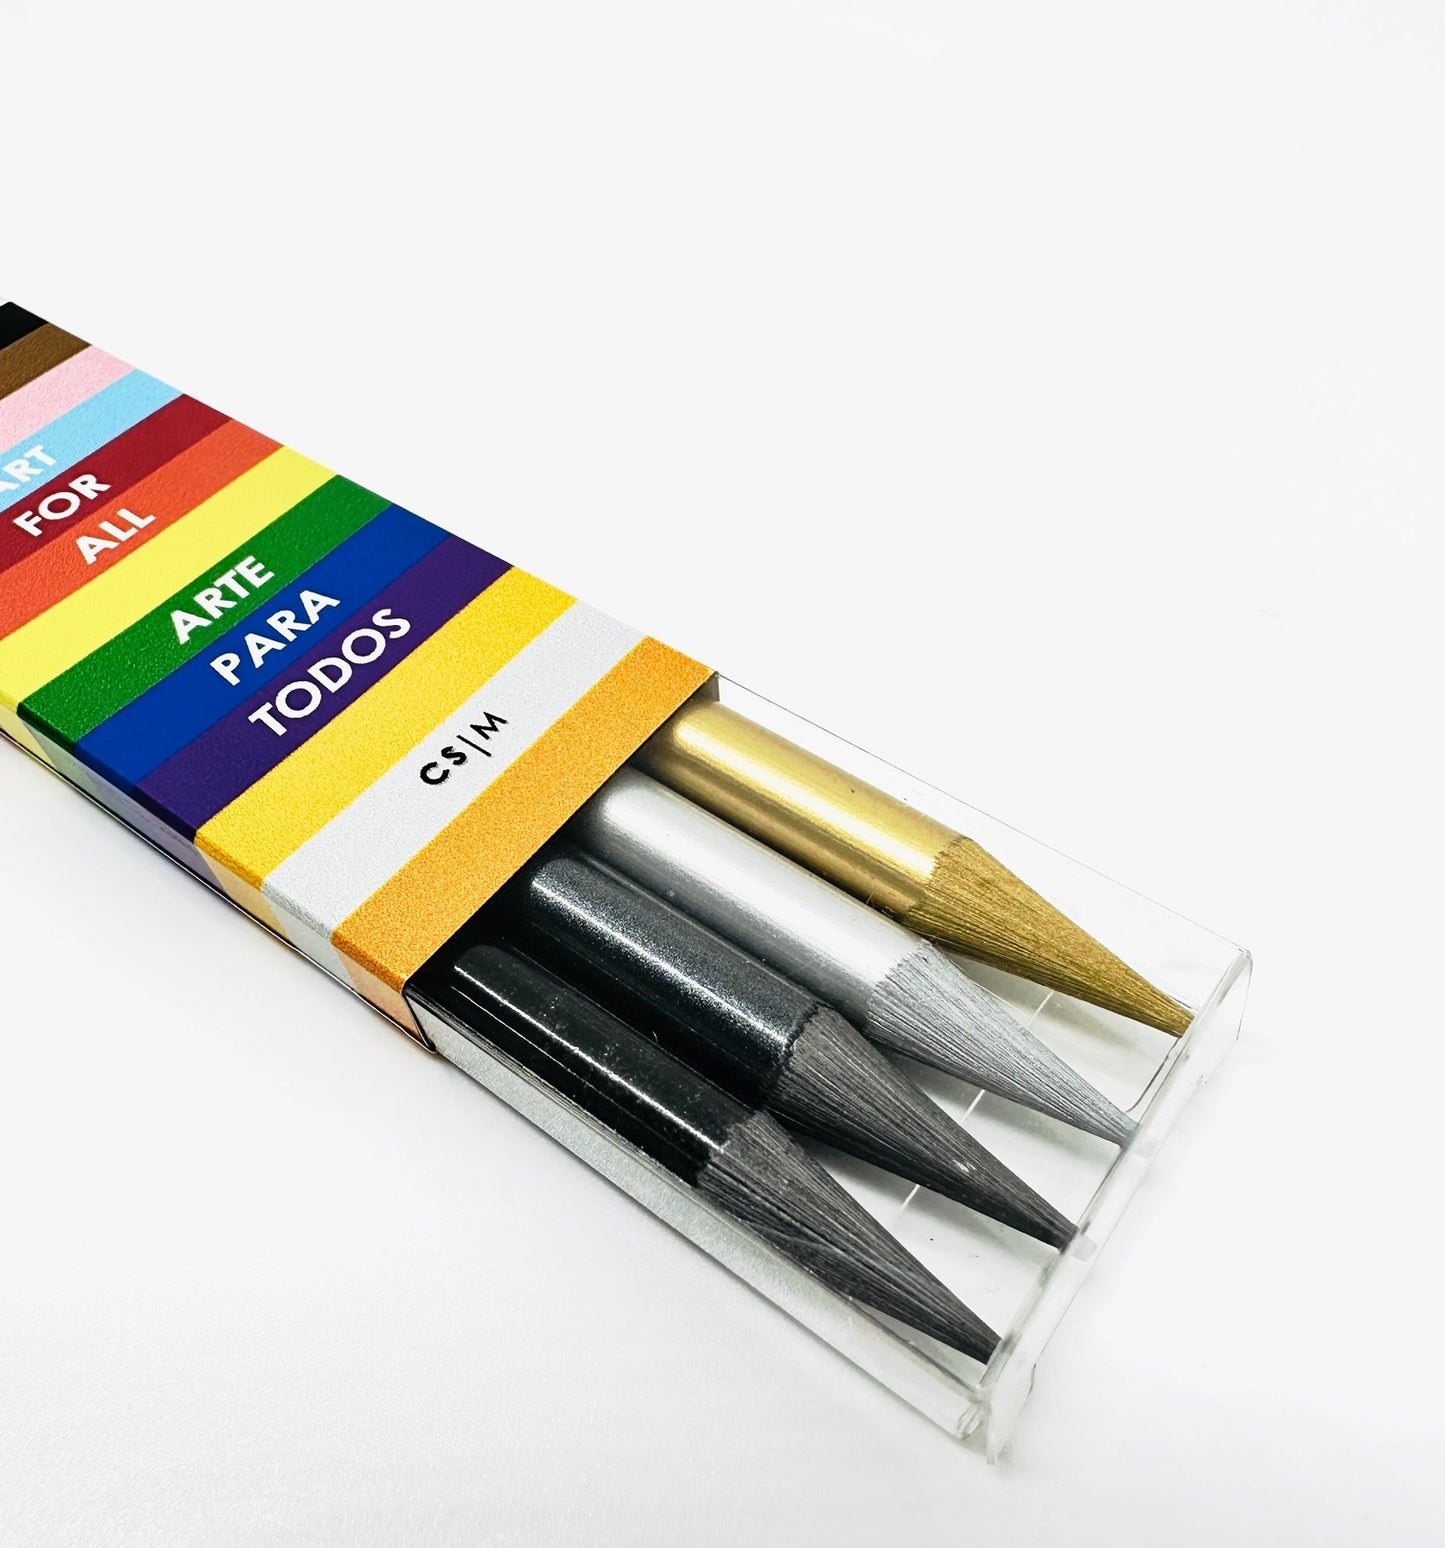 These four solid-woodless graphite pencils are perfect for sketching and drawing. They come in a clear transparent package, wrapped with a full-color printed belly band around the box. The set of four graphite pencils includes Silver, Black, Gold, and pure color.